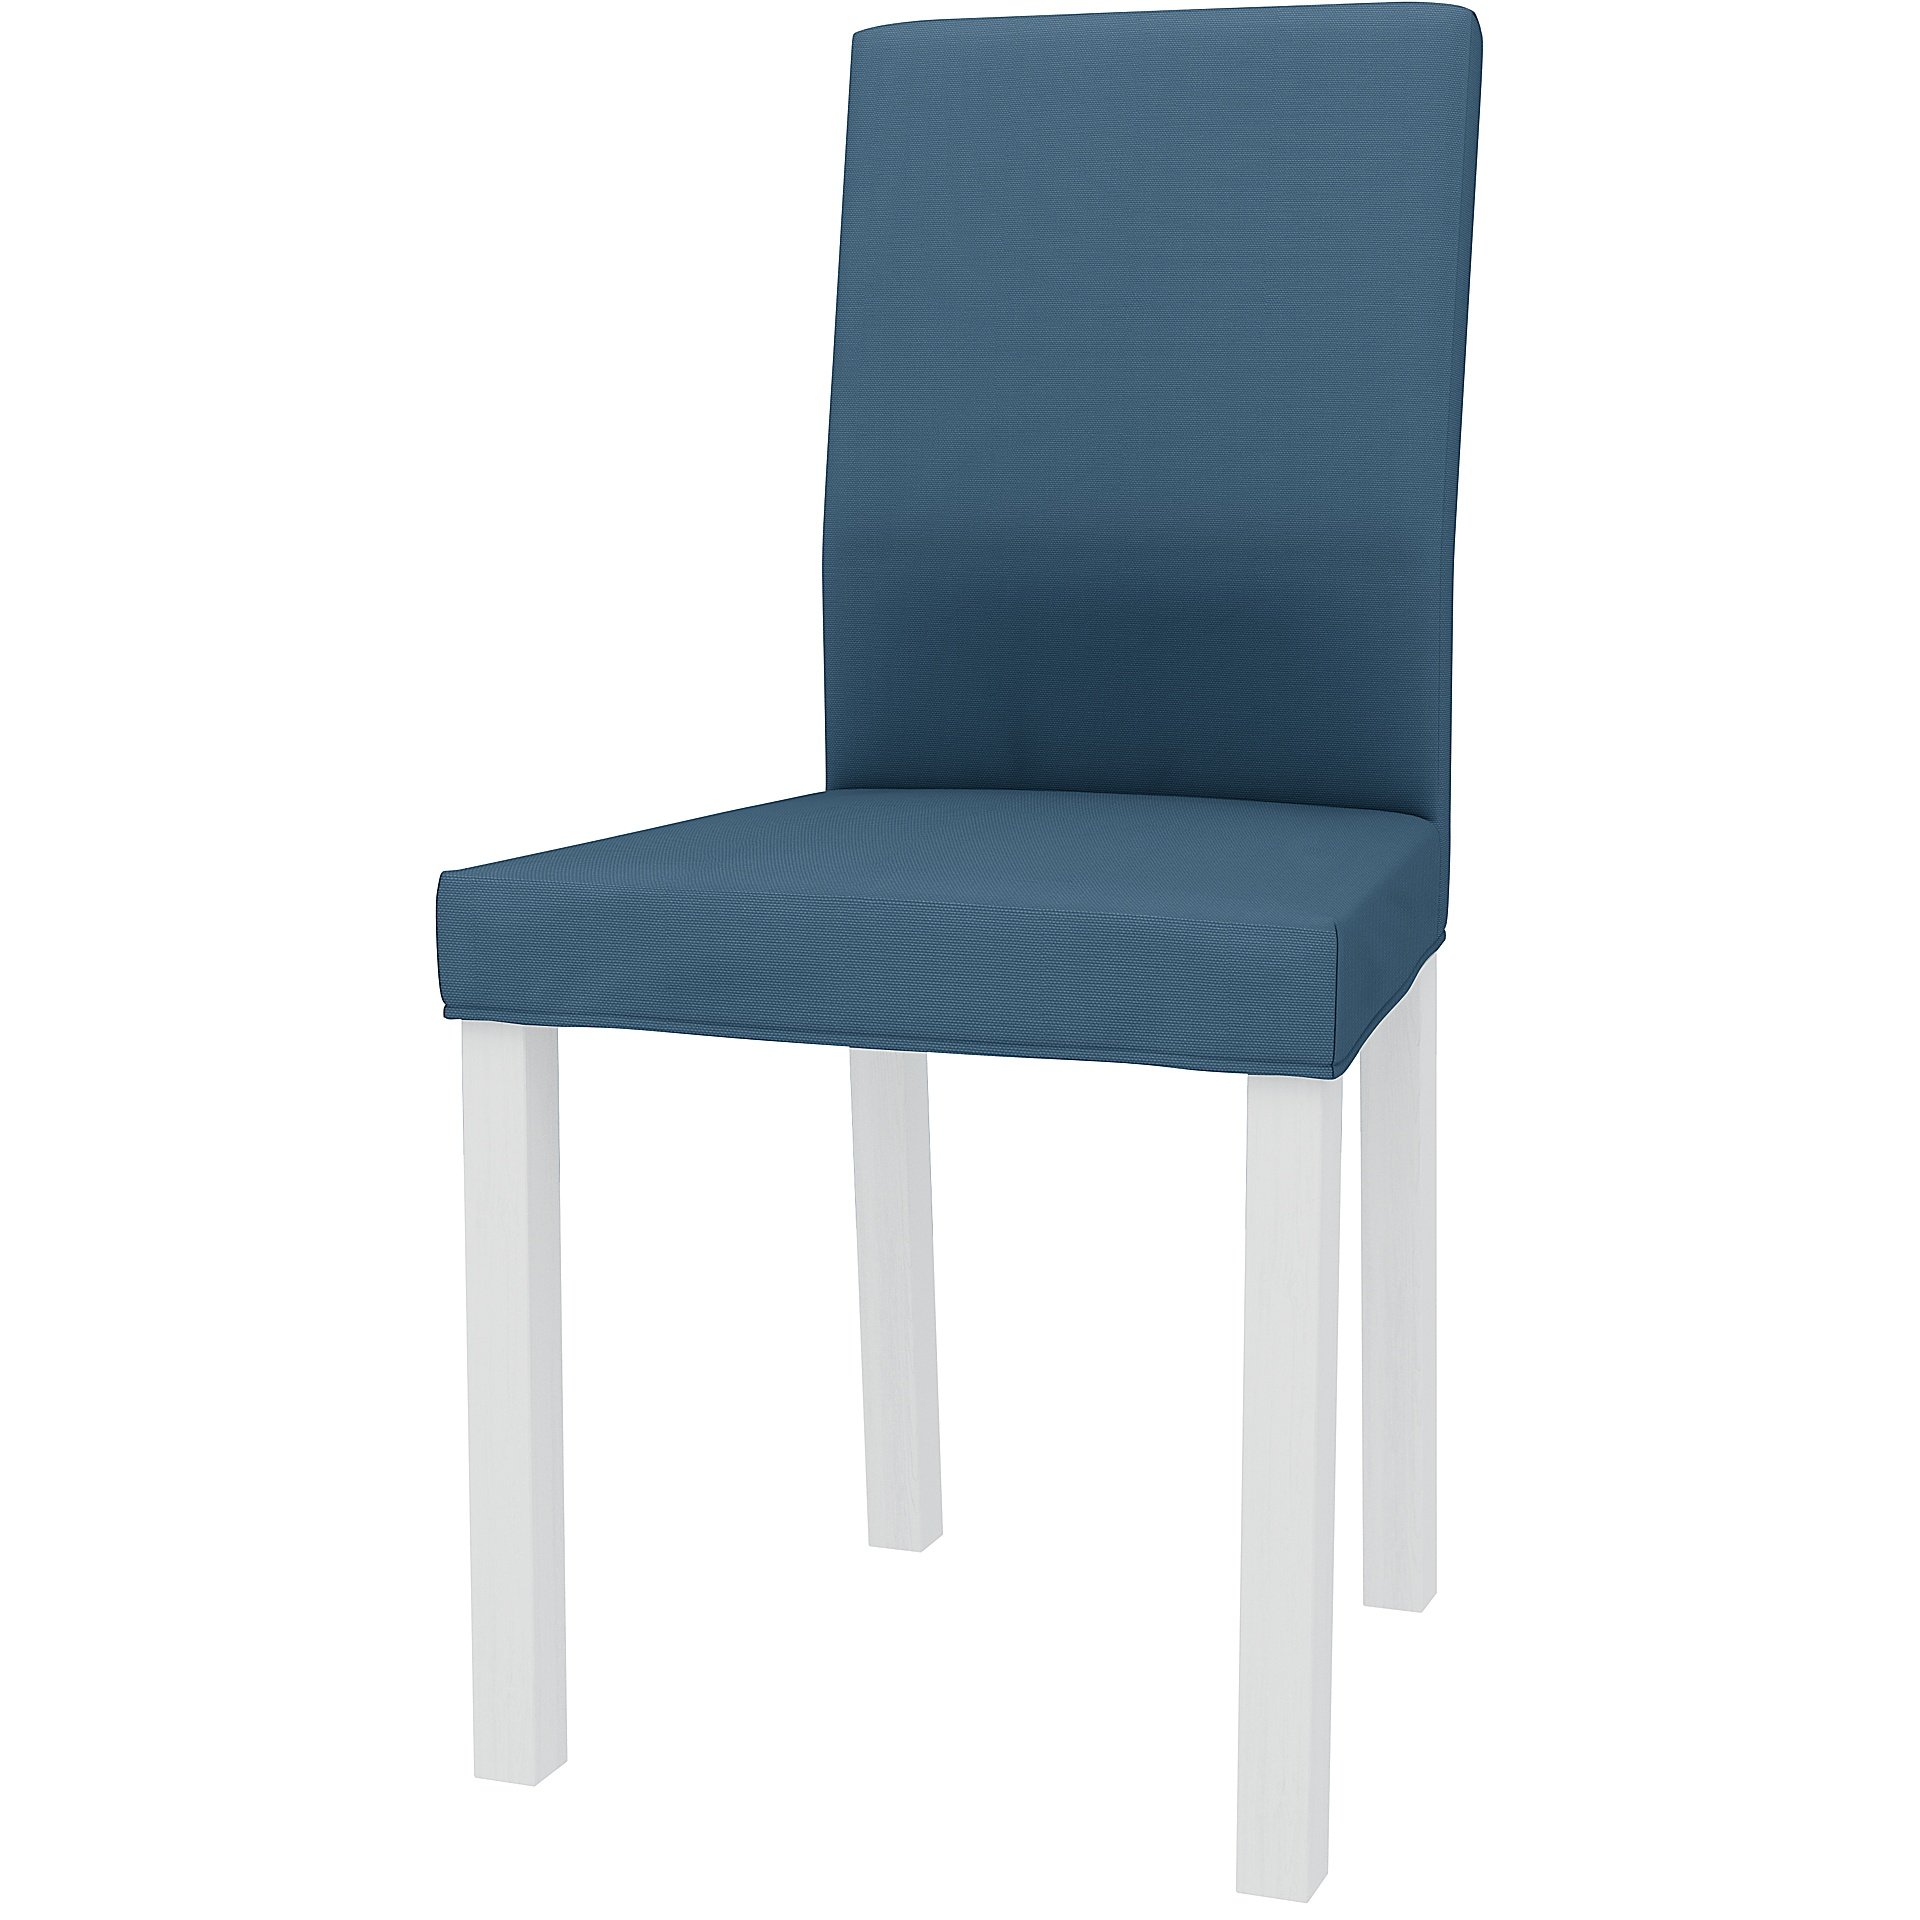 IKEA - KATTIL DINING CHAIR COVER, Real Teal, Cotton - Bemz